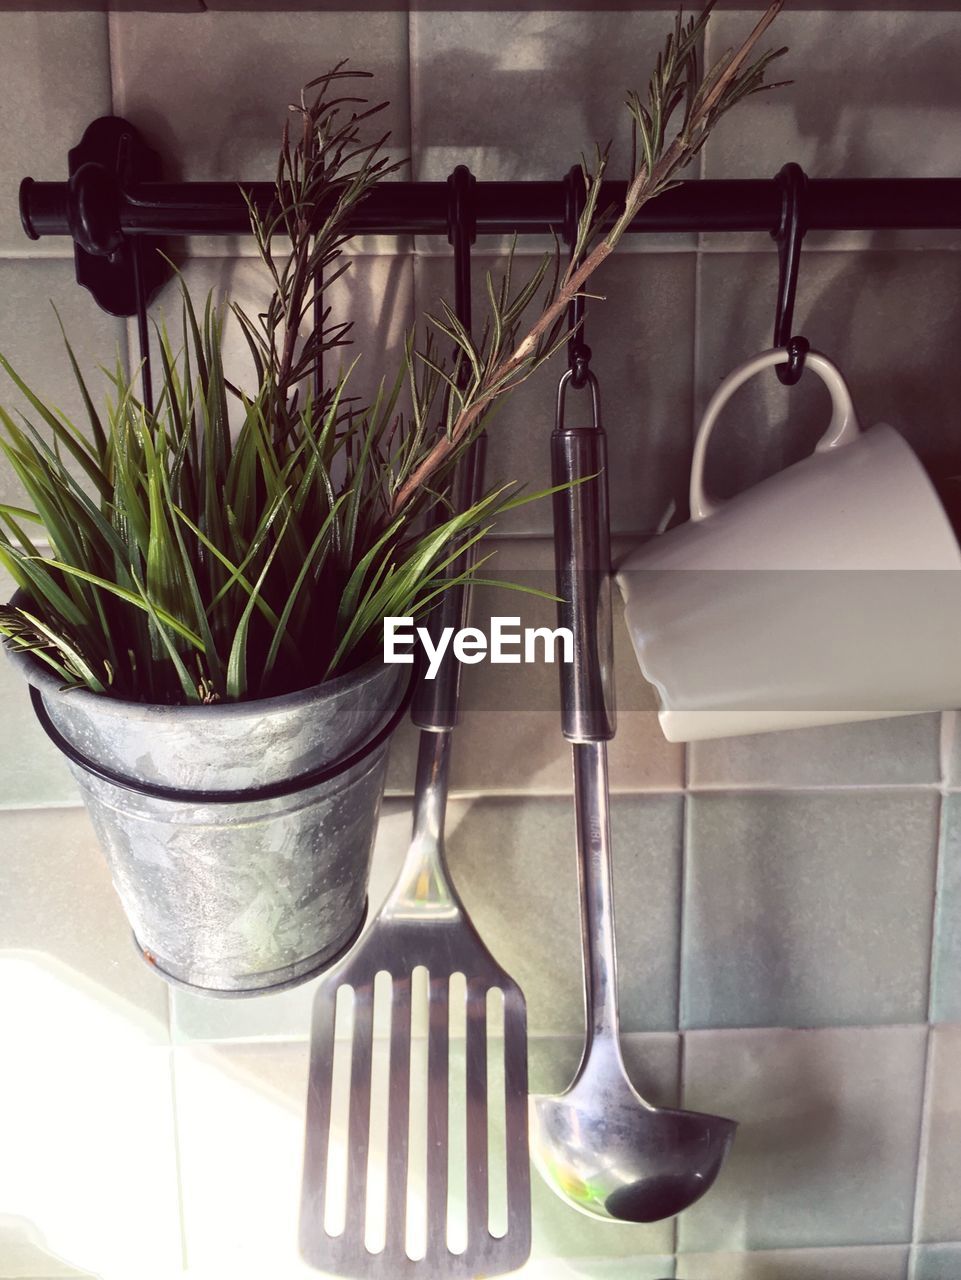 Potted plant and utensils on rod against wall in kitchen at home